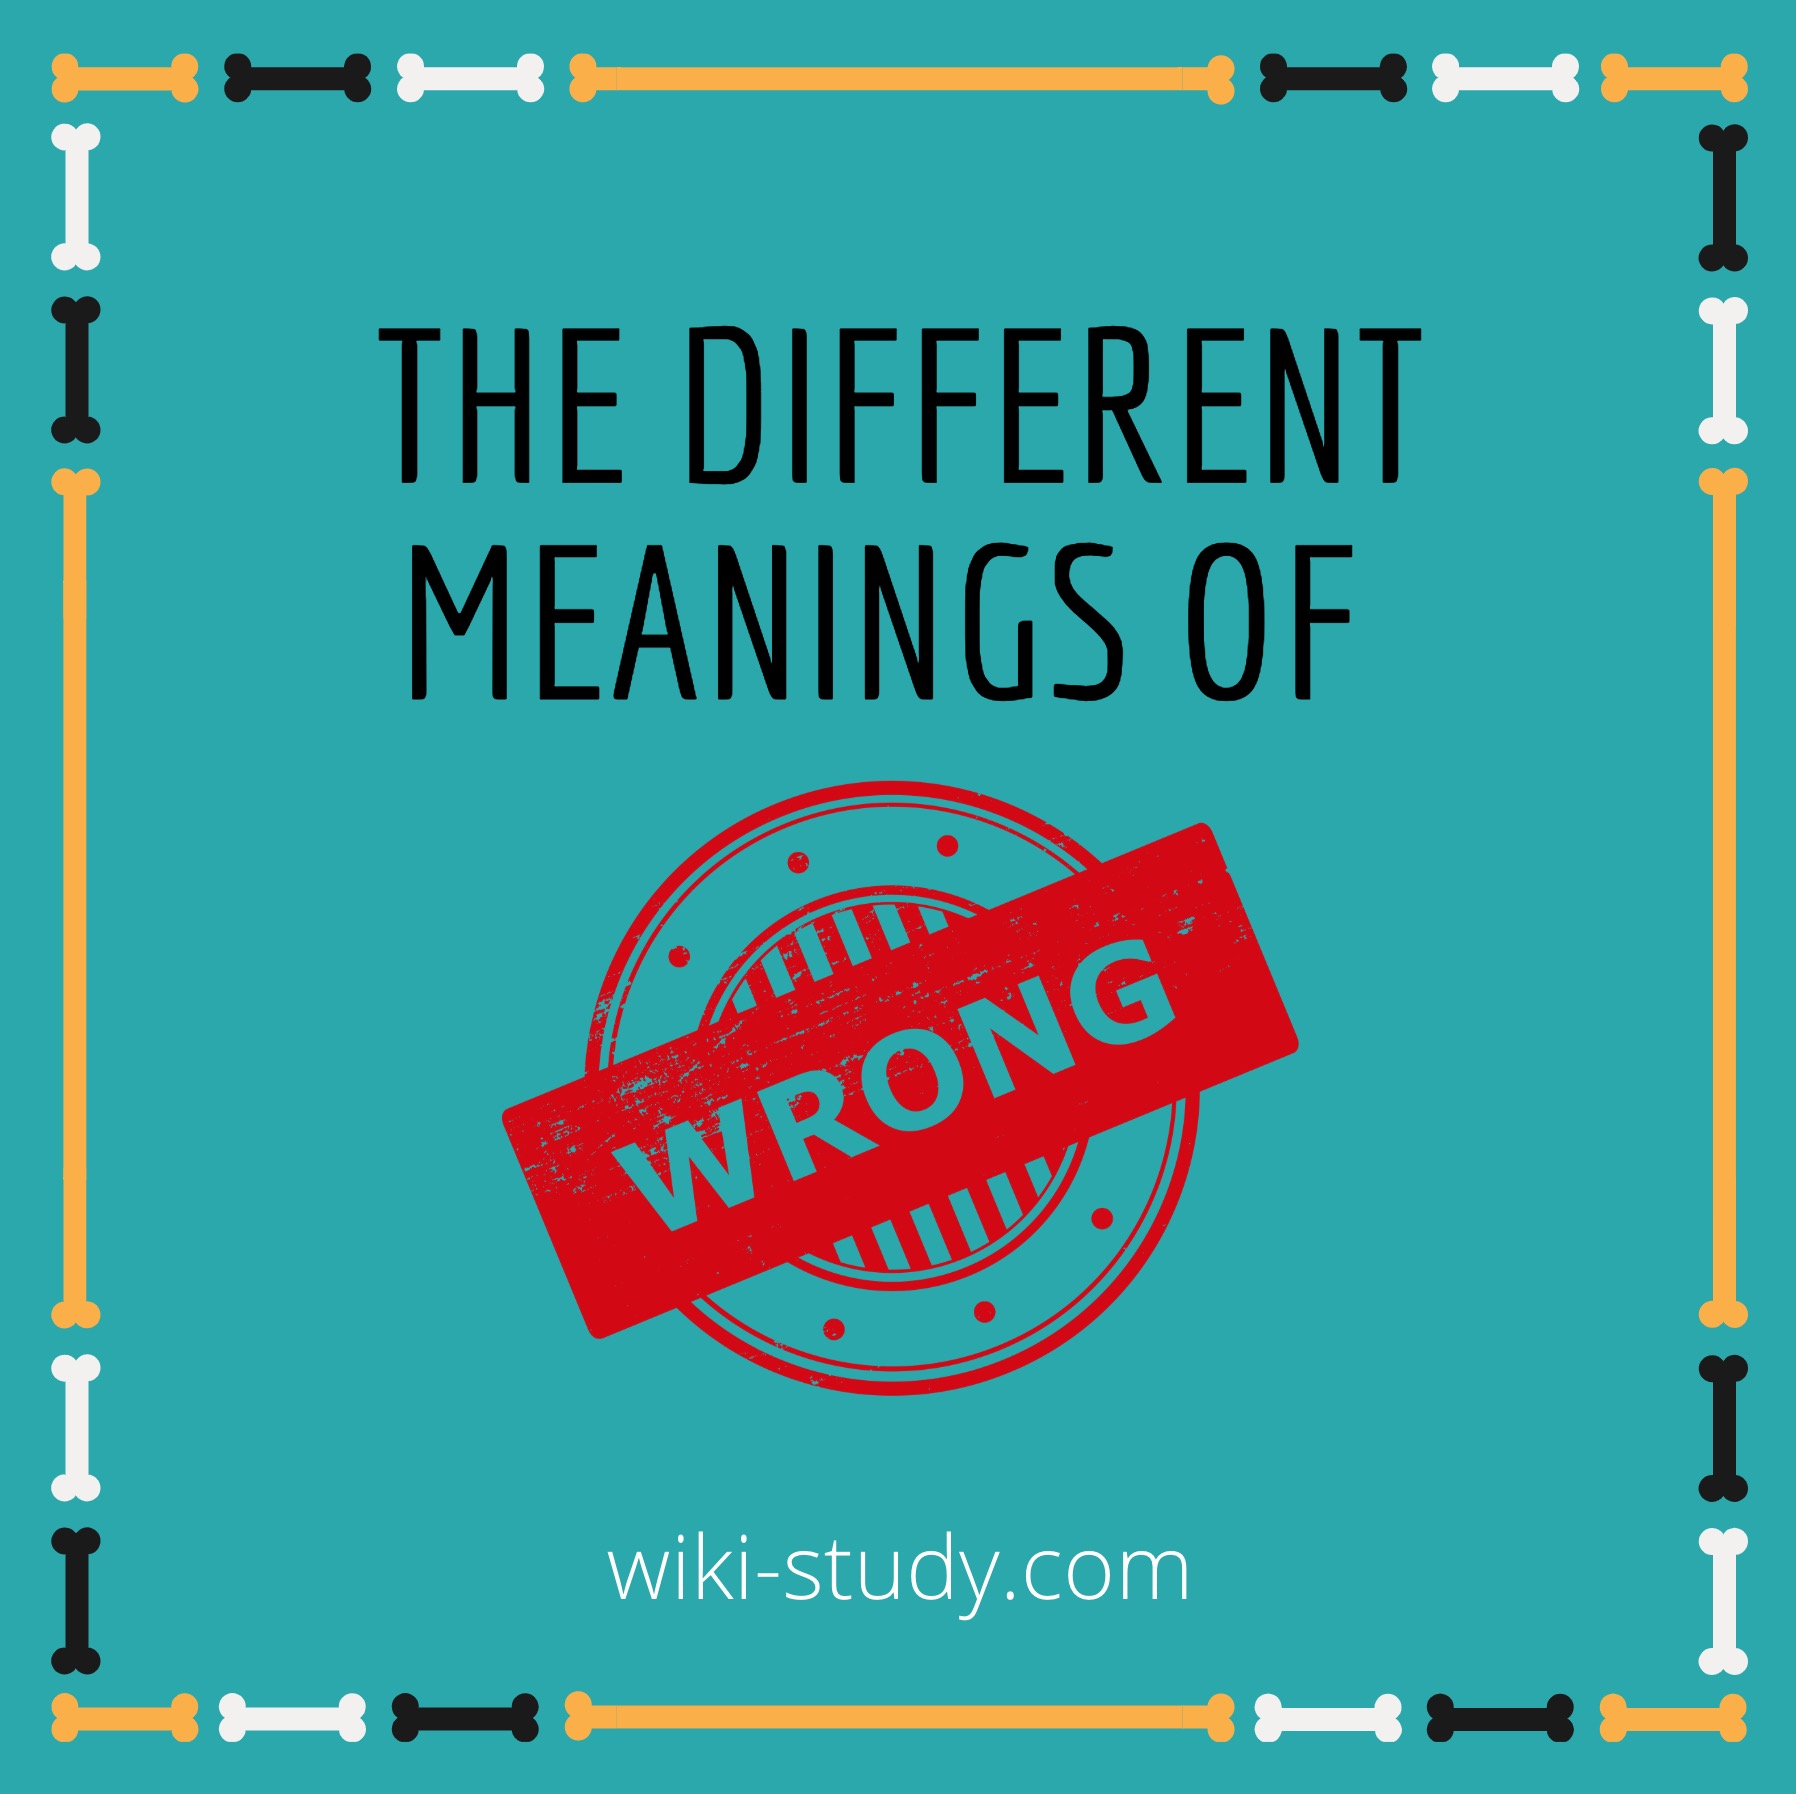 The different meanings of "wrong"